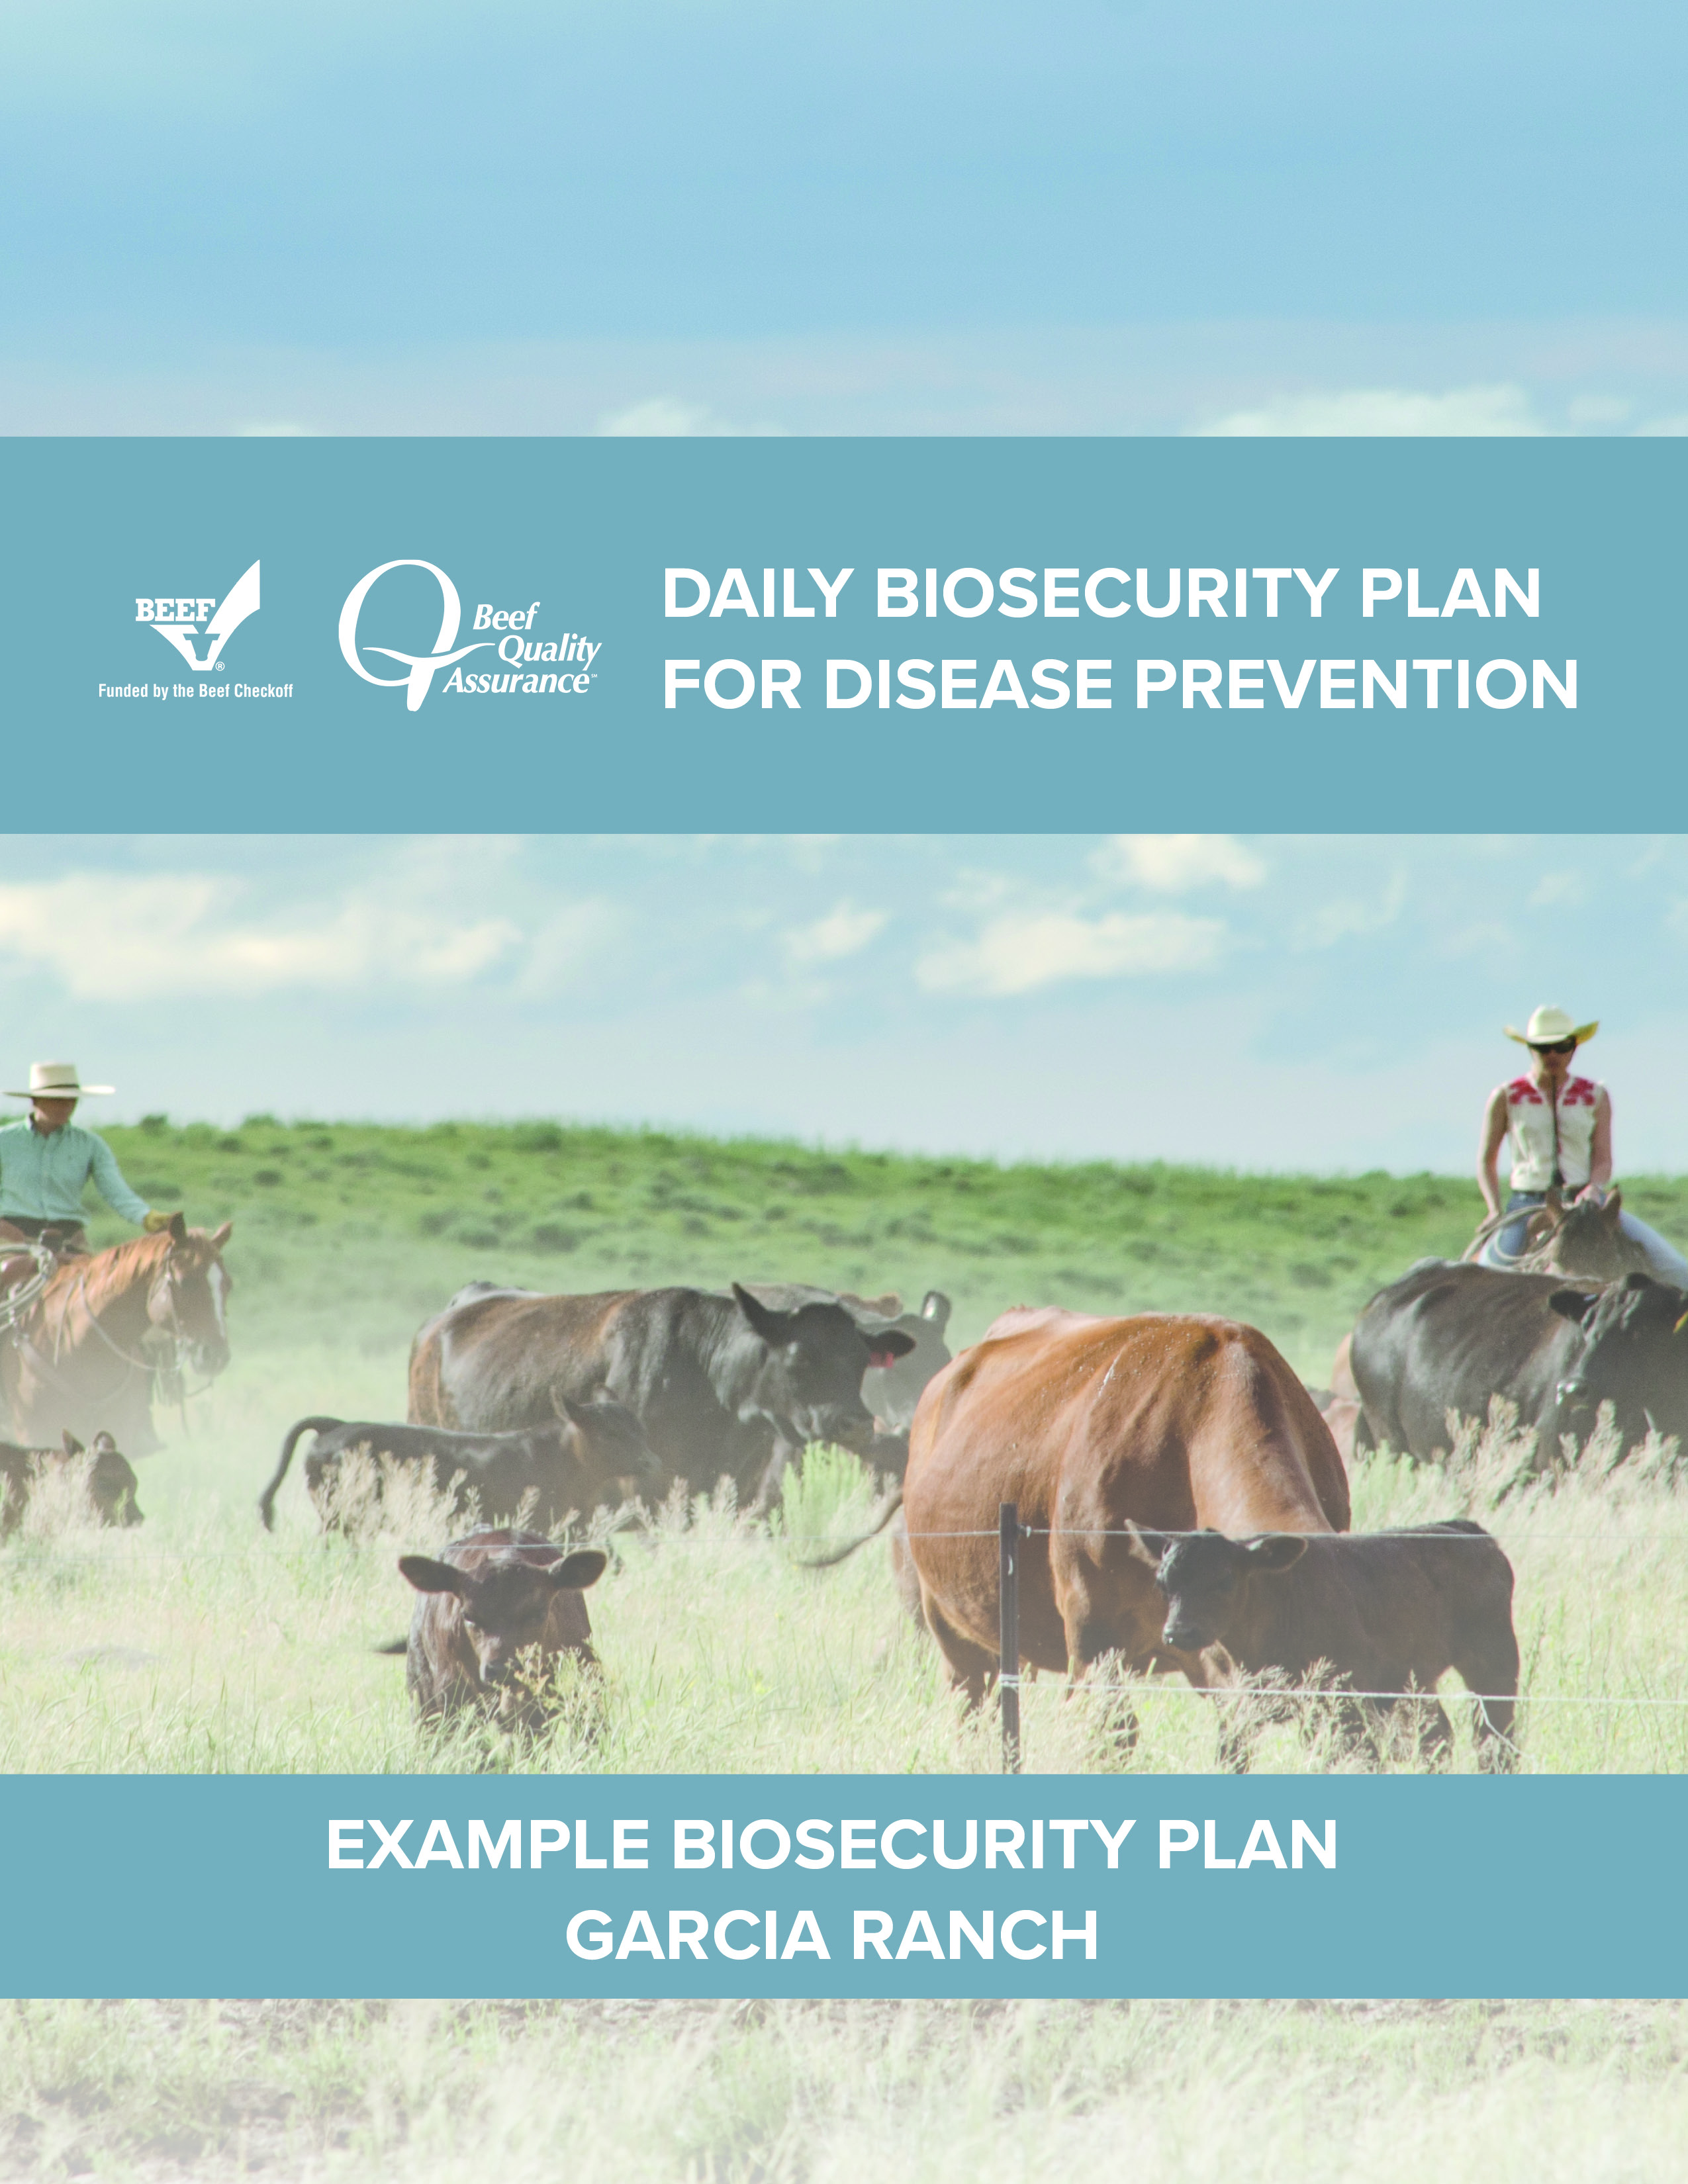 NEW TOOL HELPS FARMERS AND RANCHERS DEVELOP CUSTOM BIOSECURITY PLAN FOR DISEASE PREVENTION